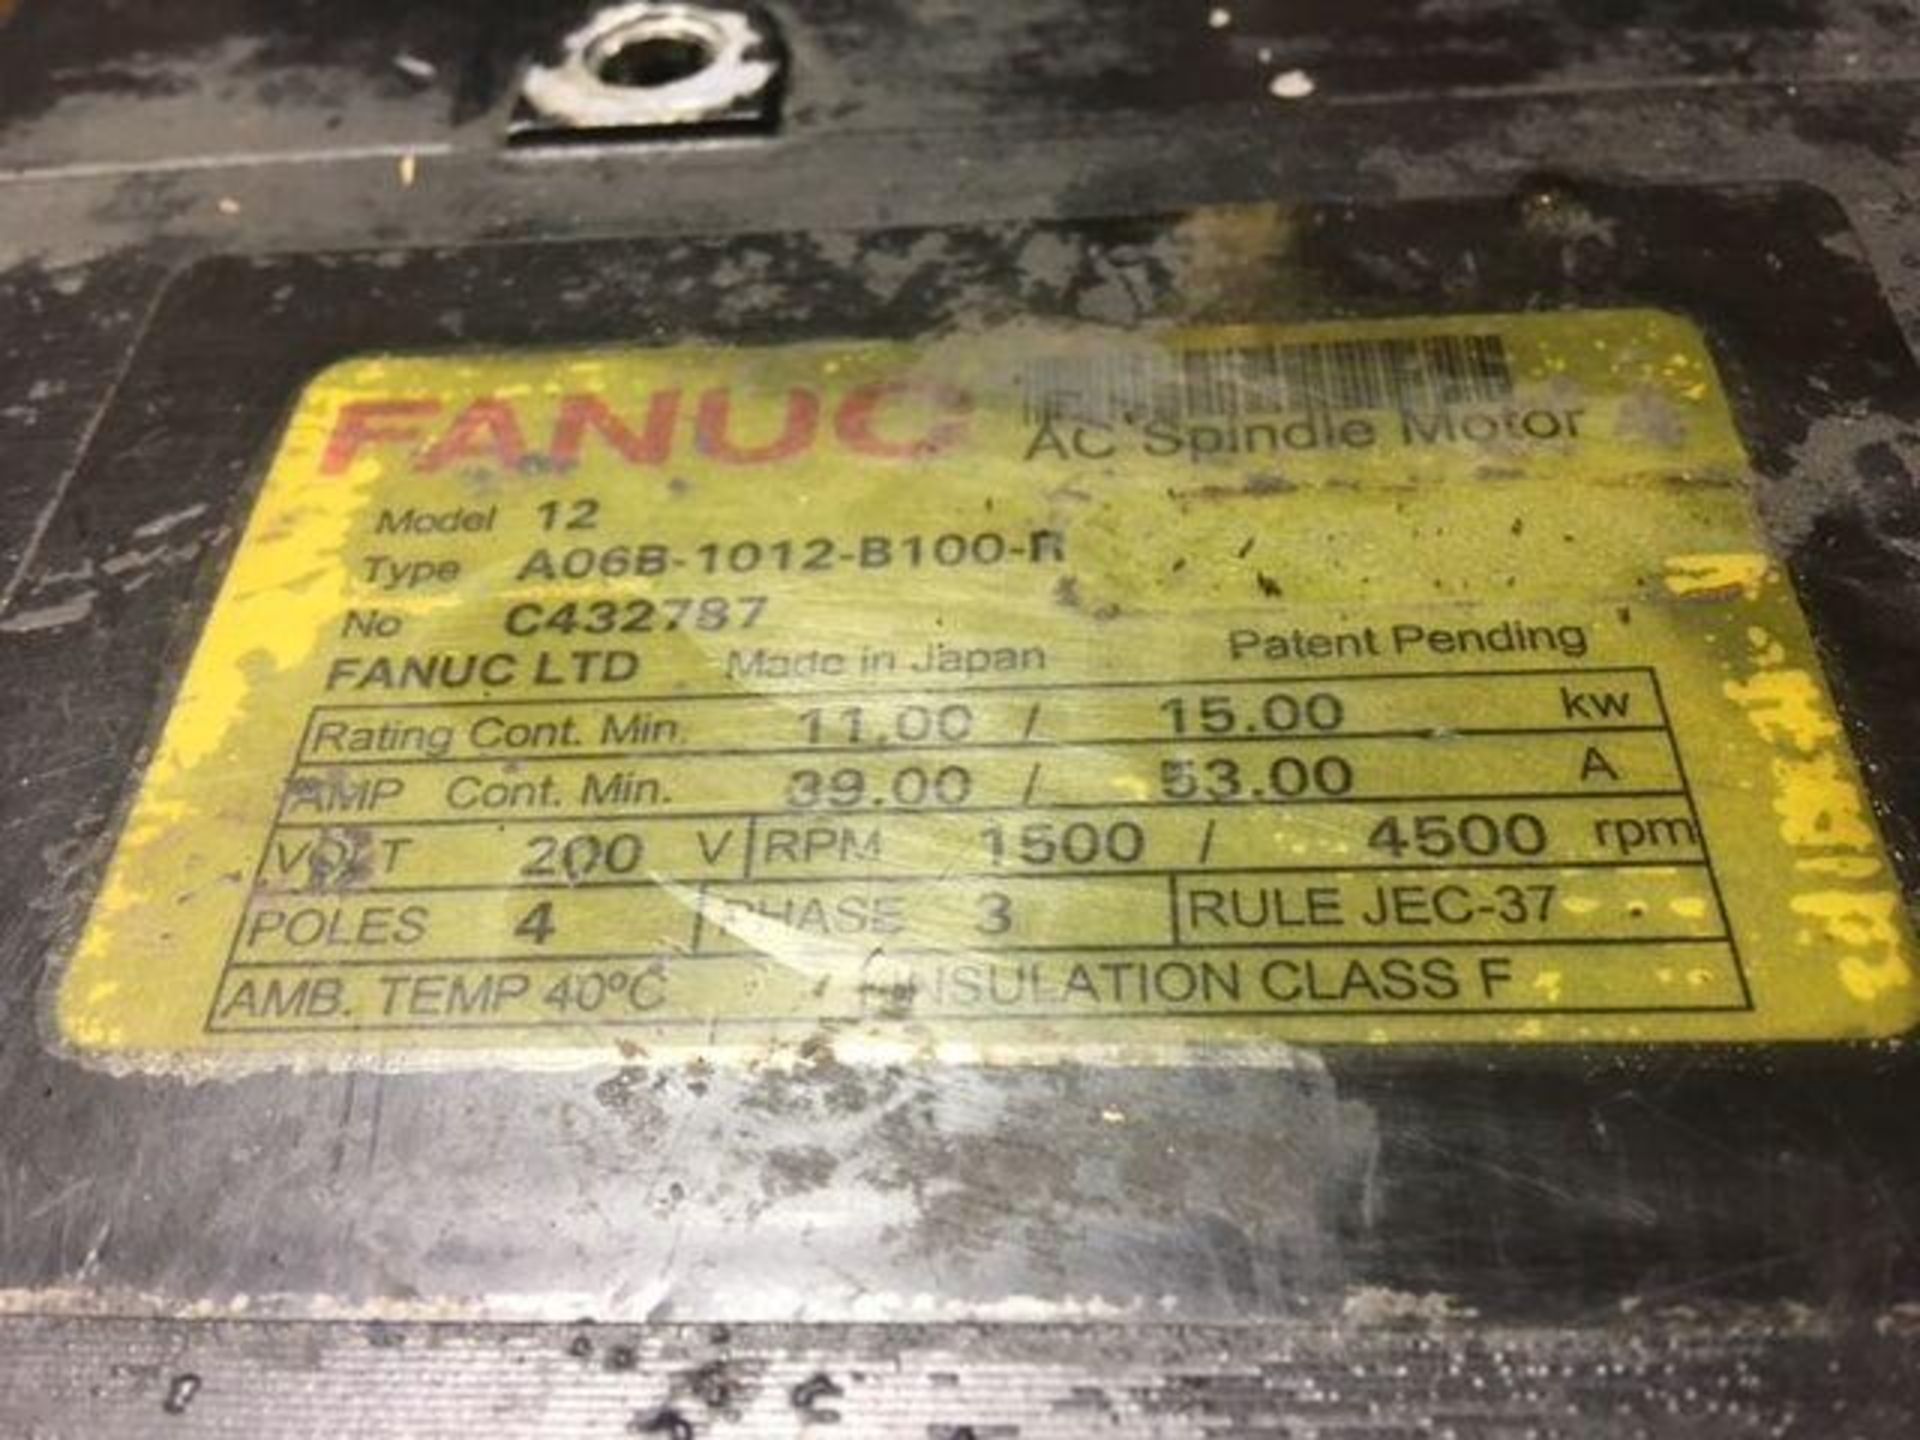 Fanuc #A06B-1012-B100-R Spindle Motor - Image 6 of 6